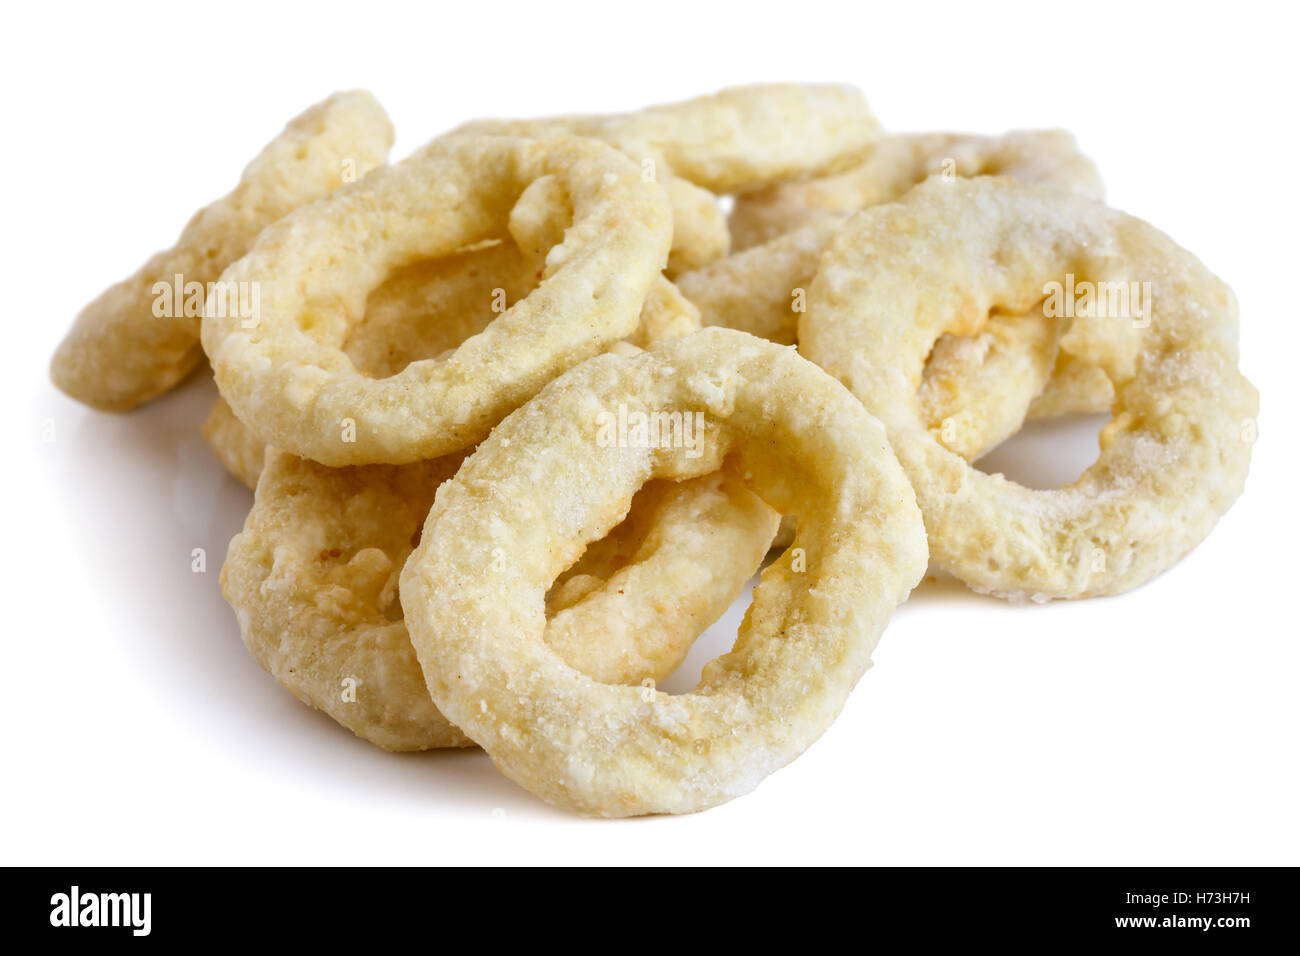 Pile of frozen uncooked battered onion or calamari rings isolated on white. Stock Photo